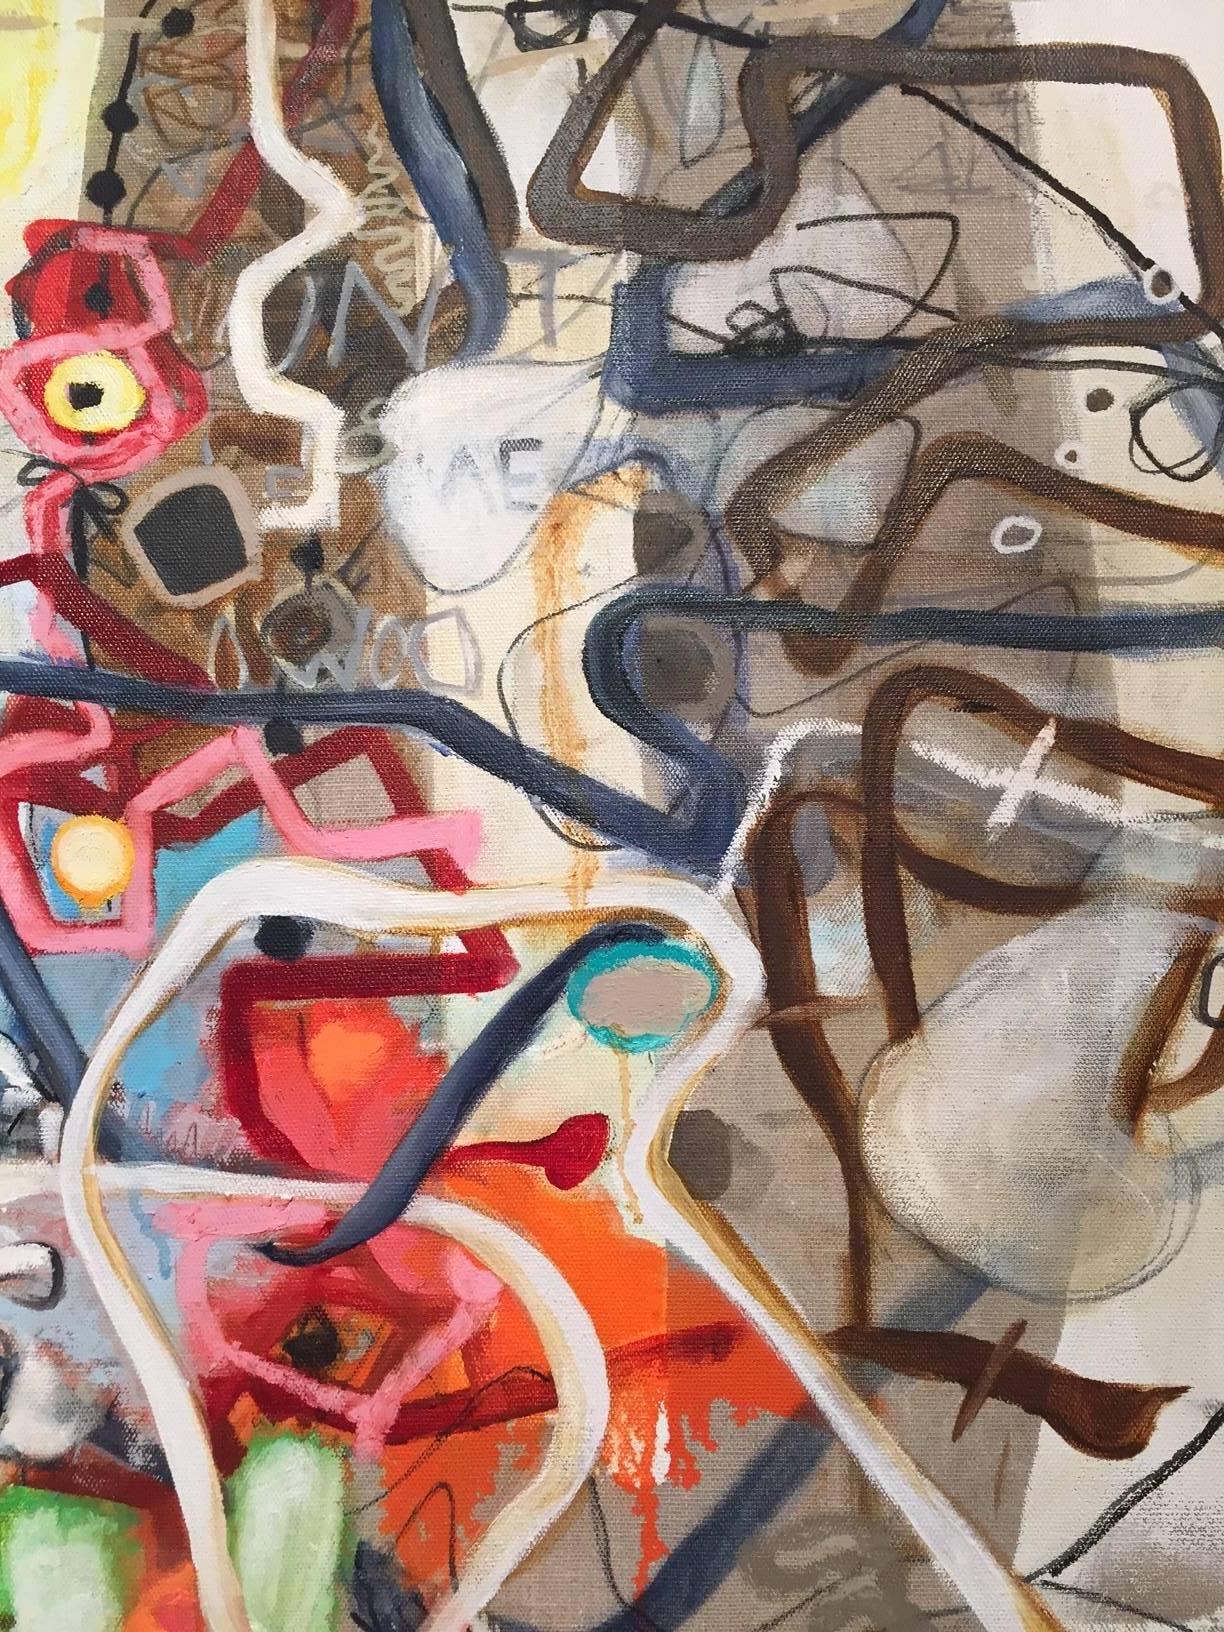 Janet Lage’s graffiti inspired energetic abstract pieces are loaded with writing, color, form and expressionistic brushstrokes. 
For Lage, the painting process is an alliance of language and image. The narrative is based on the changing dynamics of